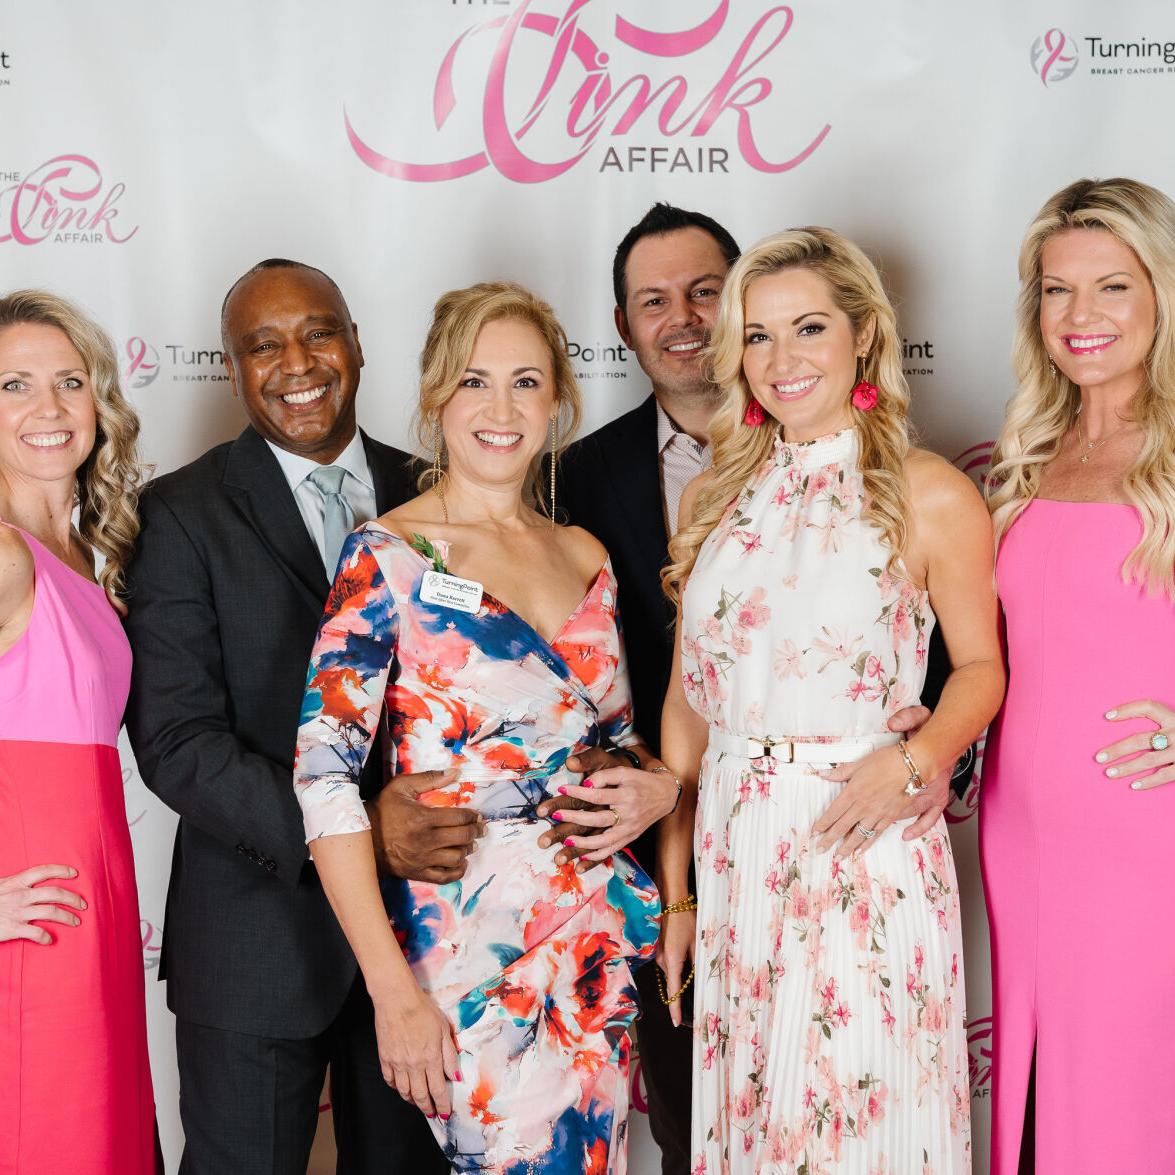 TurningPoint Breast Cancer Rehabilitation to host 22nd annual Pink